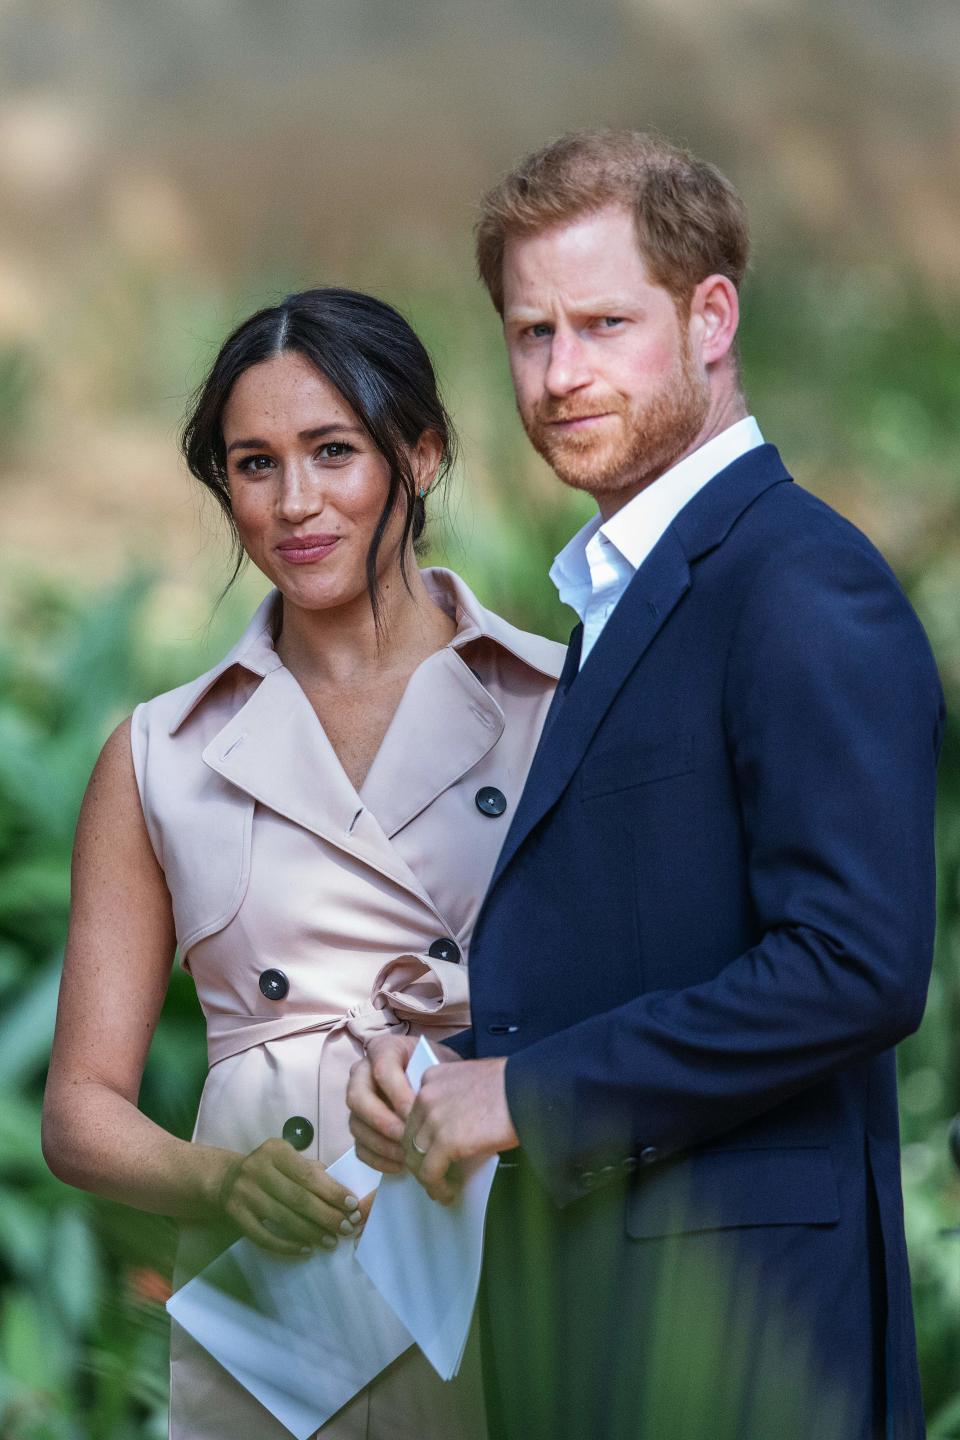 Britain's Prince Harry, Duke of Sussex(R) and Meghan, the Duchess of Sussex(L) arrive at the British High Commissioner residency in Johannesburg where they  will meet with Graca Machel, widow of former South African president Nelson Mandela, in Johannesburg, on October 2, 2019. - Prince Harry recalled the hounding of his late mother Diana to denounce media treatment of his wife Meghan Markle, as the couple launched legal action against a British tabloid for invasion of privacy.